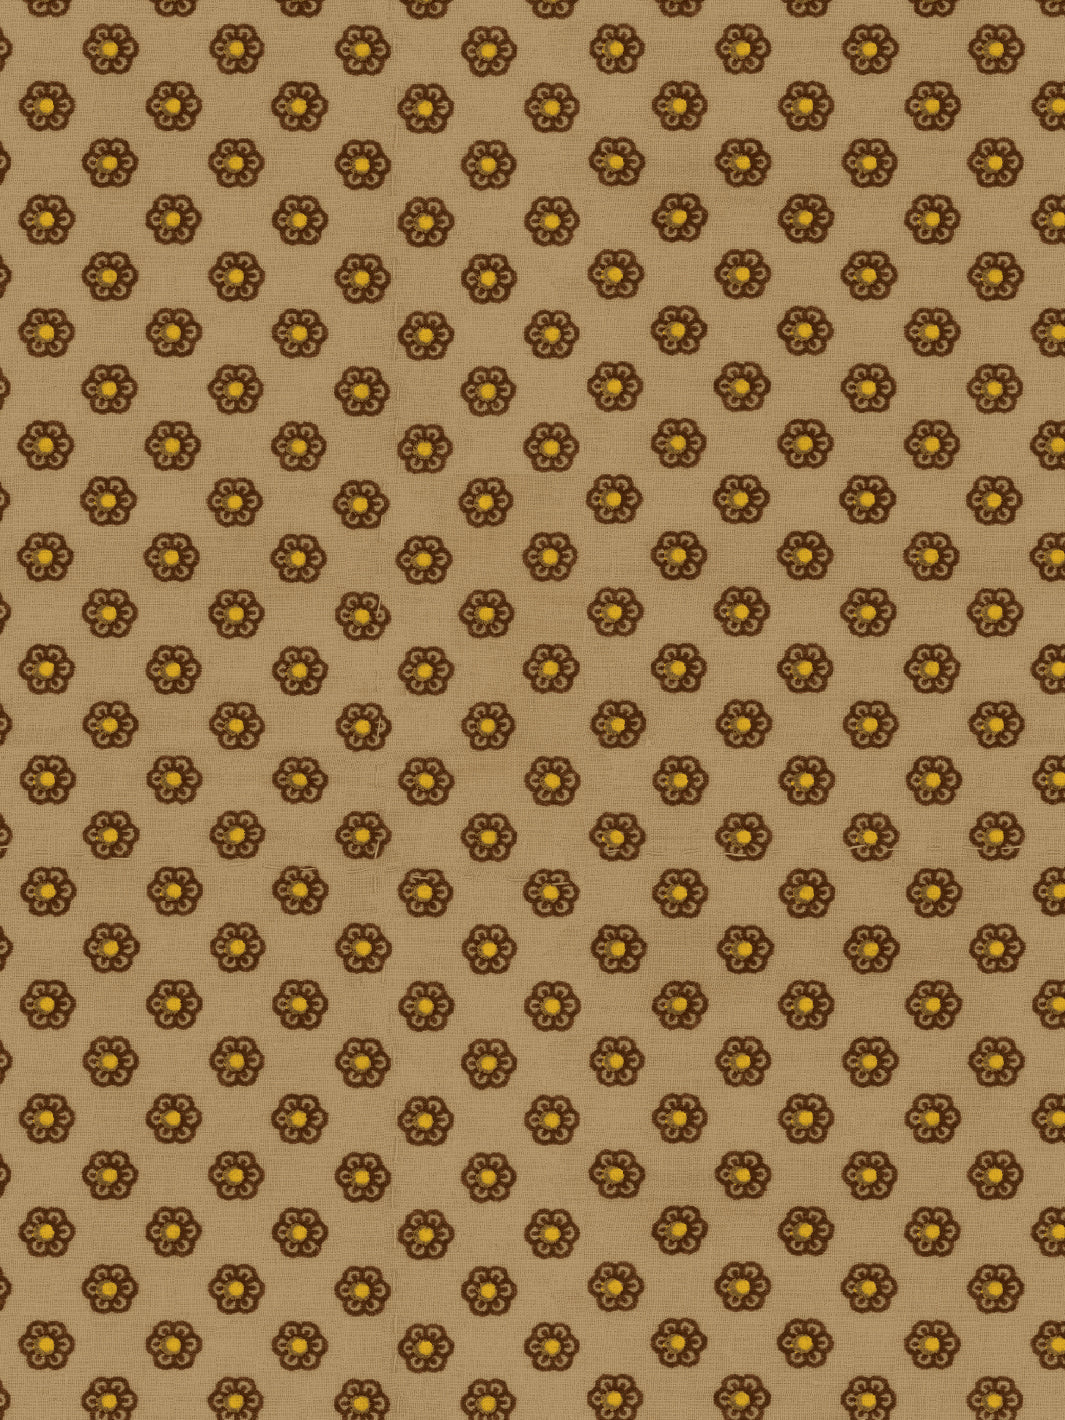 'Ditsy Flower' Wallpaper by Chris Benz - Gold On Brown